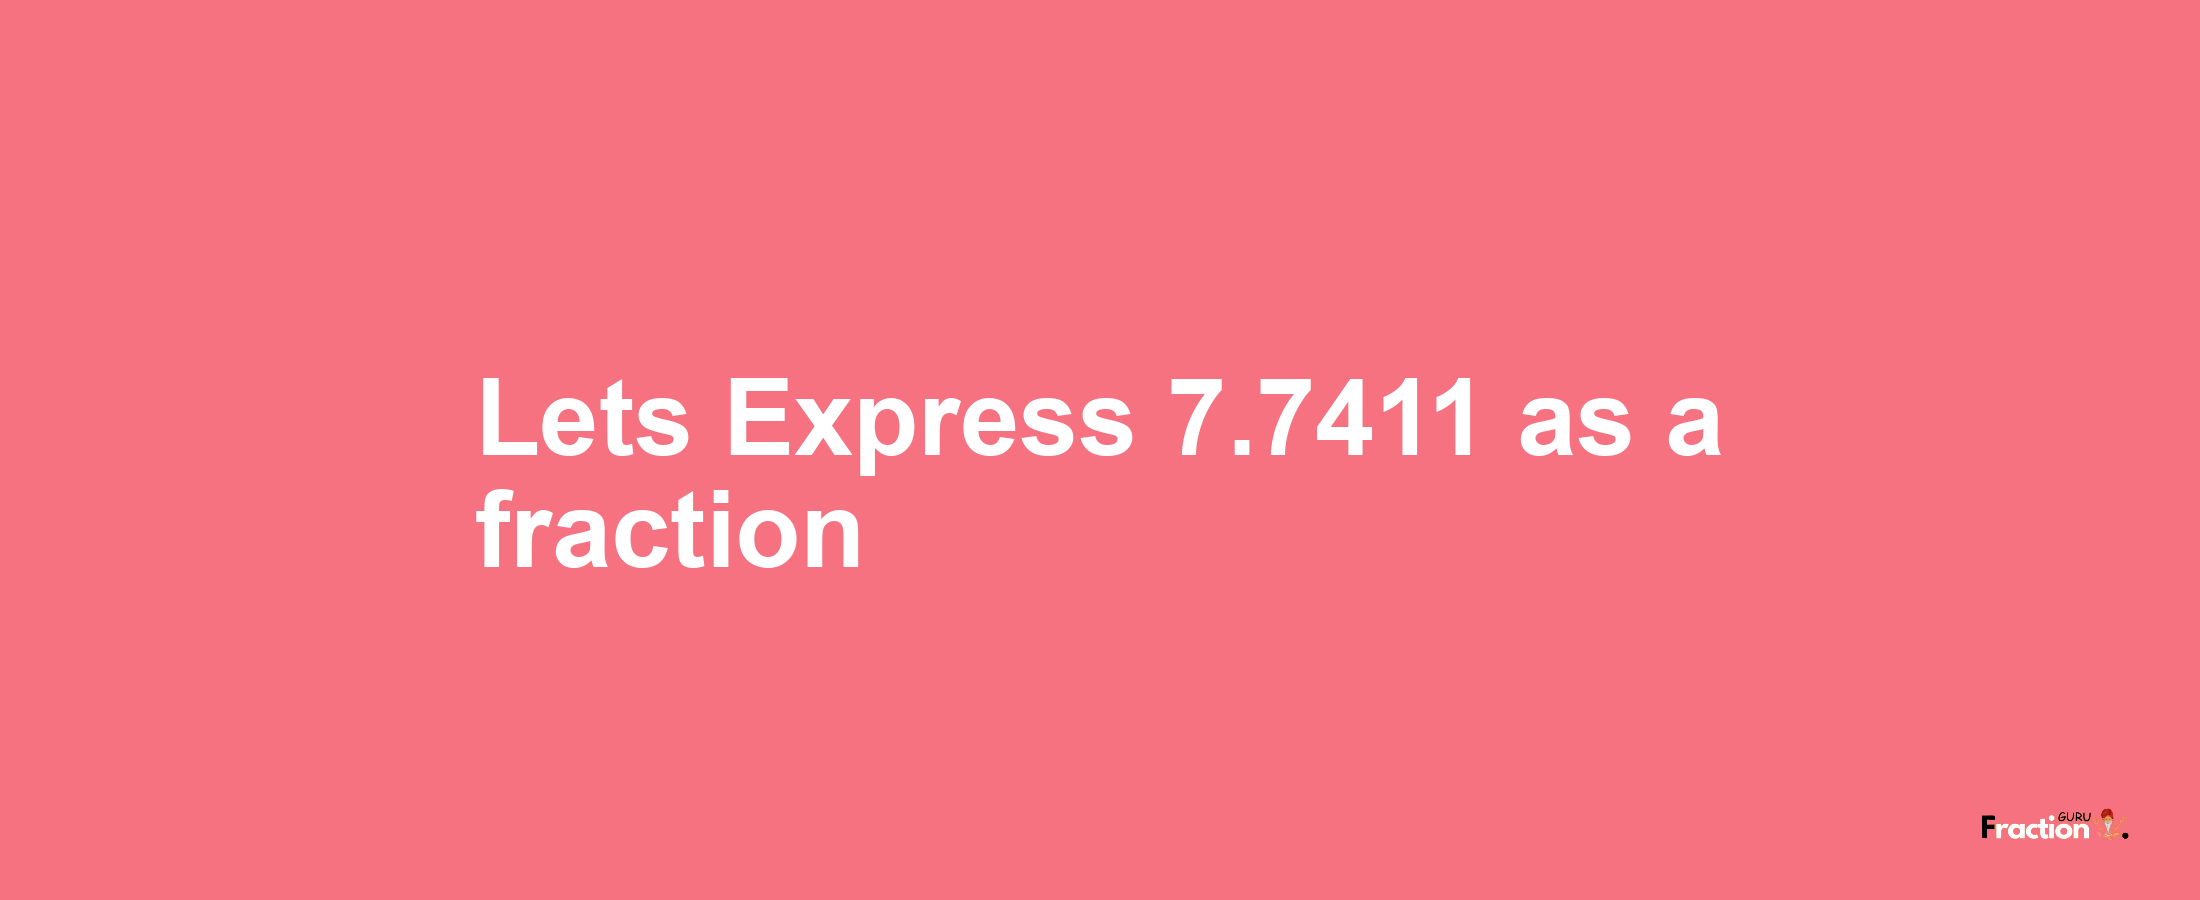 Lets Express 7.7411 as afraction